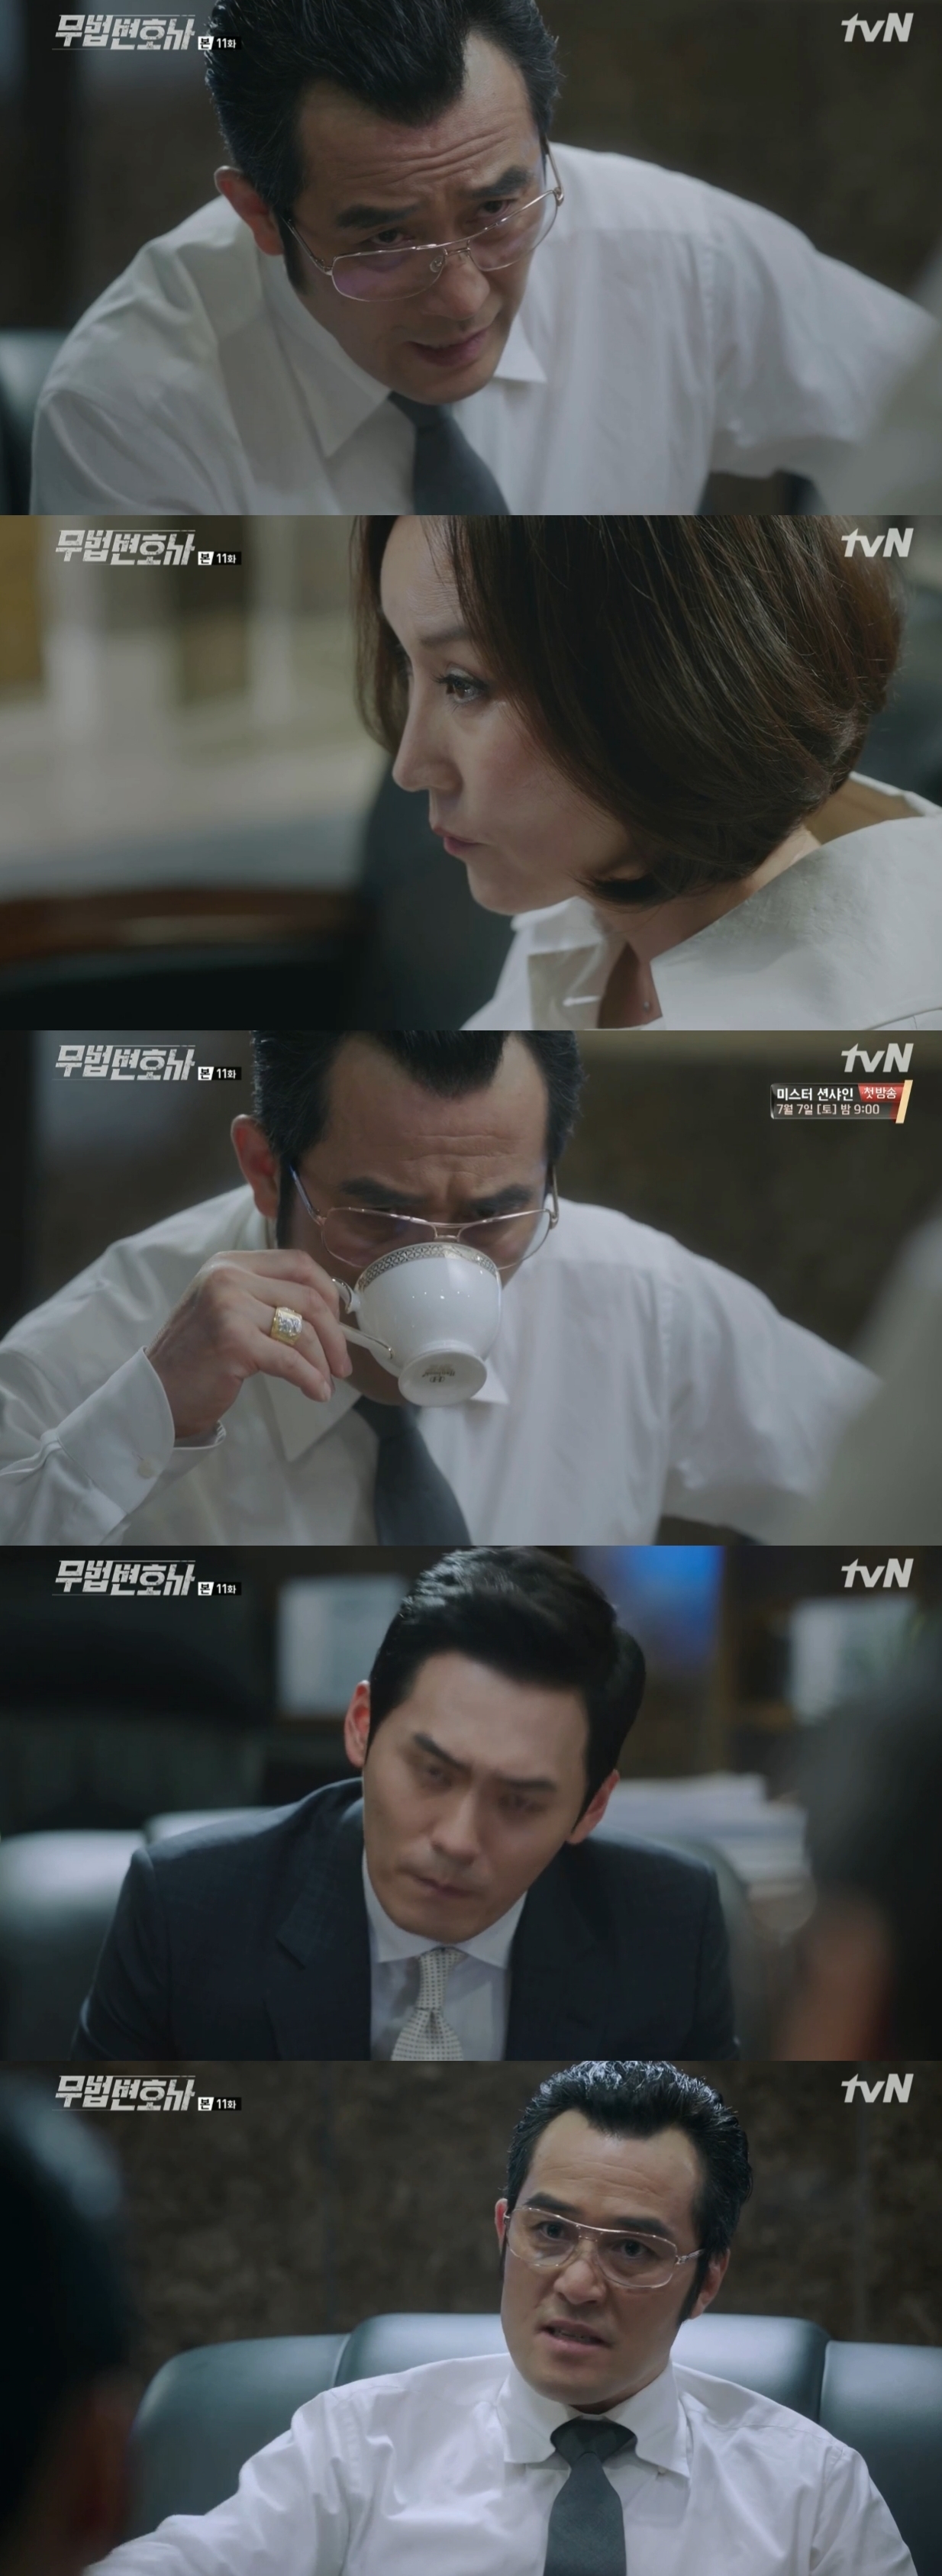 On TVN Lawless Lawyer, which aired at 9 p.m. on the 16th, An O-joo (Choi Min-soo), who appeared at the trial to prove his innocence, was portrayed.On this day, An O-ju testified that the killer who killed Ahn Nae-sang was not Bong Sang-pil but his bodyguard, and that he committed murder with false loyalty to himself.An Oju had previously told Ha Jae-i (Seo Ye-ji) to watch what he would get after the trial: what he had gained was the trust and support of an established citizen.Bong Sang-pil and Ha Jae-yi, who noticed that there was a crack between Cha Moon-sook and An-oh, planned to play a full-scale war with Judge Cha Moon-sook.In the meantime, Cha Moon-sook went to An-ohju and asked why he testified at the trial. An-oh lied to Cha Moon-sook.He said he received the photo with the threatening phone before the trial, and took out a picture of the two of them 18 years ago.Anoju did not miss it, and mentioned that Bong Sang-pil was aimed at the two.He emphasized his loyalty and said he would devote his efforts to guard Judge Cha Moon-sook no matter what.All of this was a lie of An Oroju, a crocodile parasitic, but the tears he shed were perfect enough to deceive everyone.Anoju justified his lie, saying, Falsehood is something you believe only if the truth is contained.